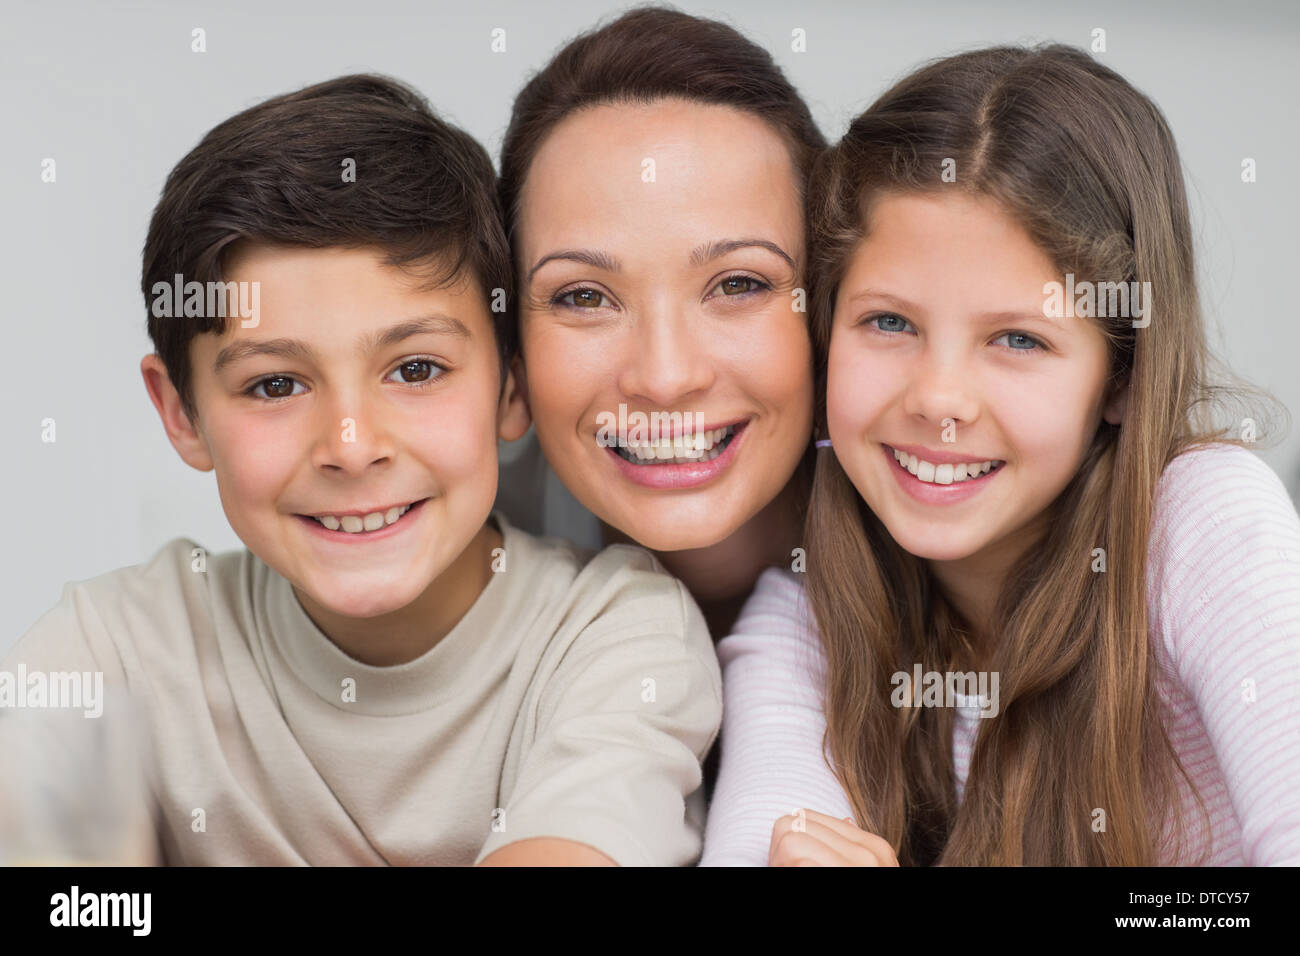 Closeup portrait of a mother with kids Stock Photo